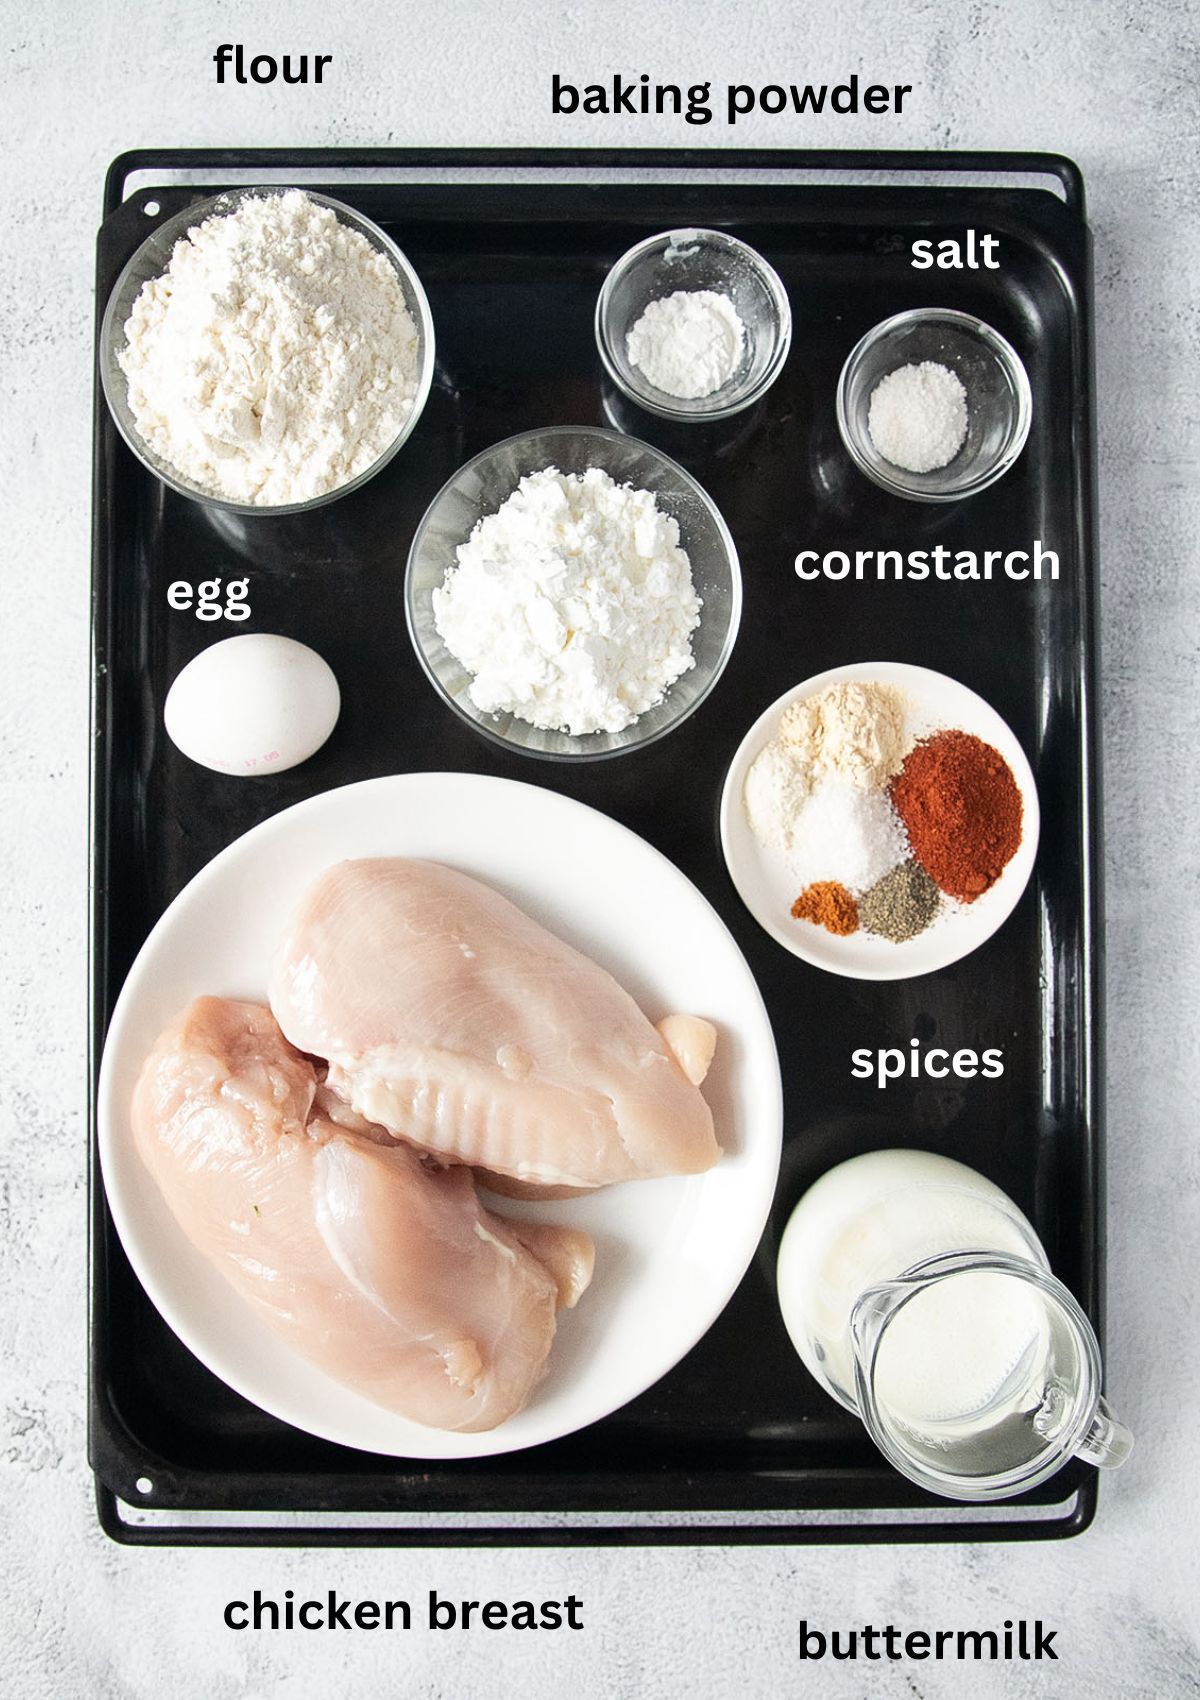 listed ingredients in bowls for making fried chicken breasts.